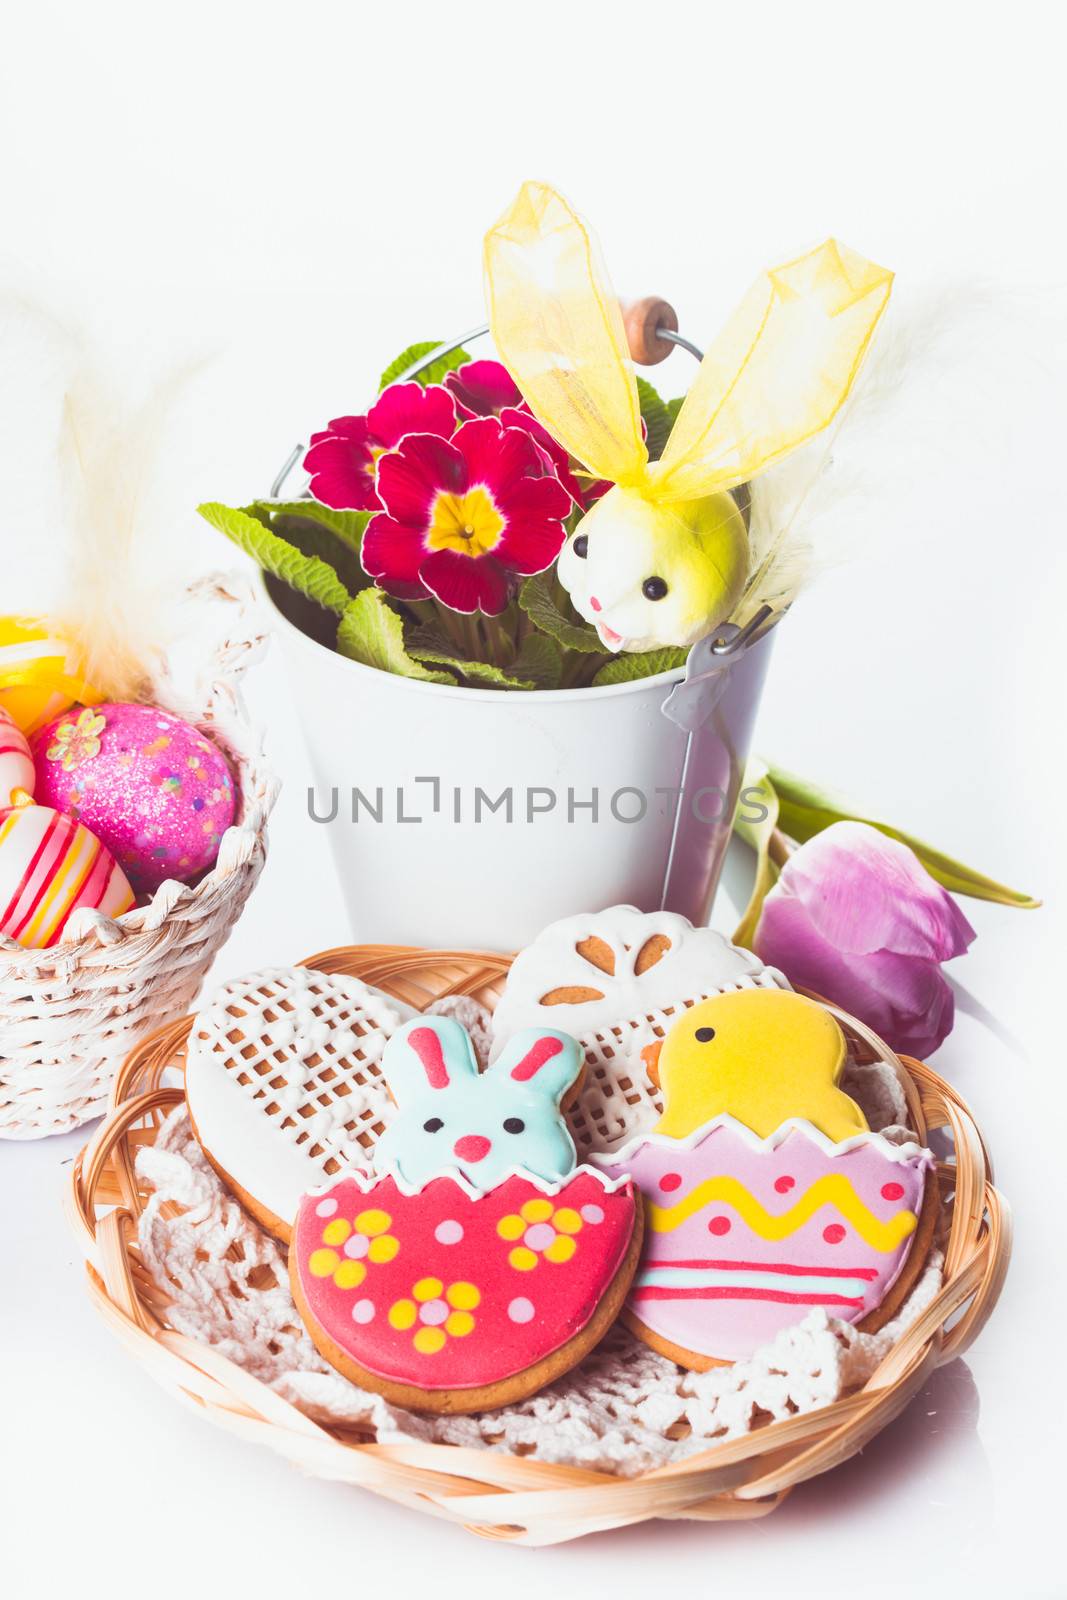 Easter cookies and decorative eggs by oksix